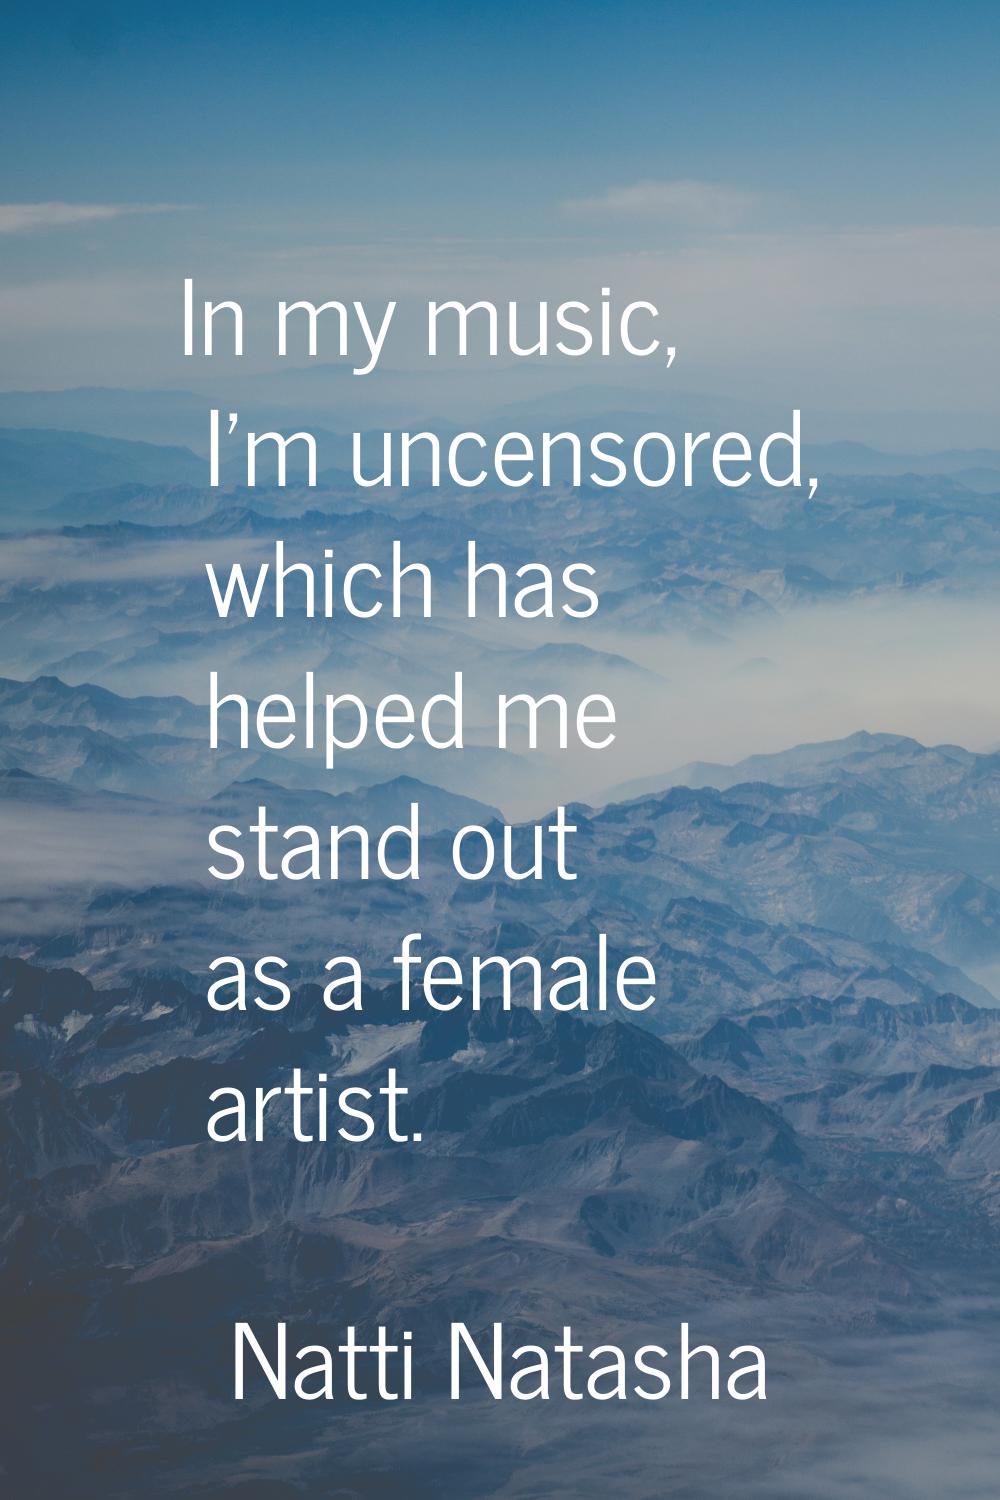 In my music, I'm uncensored, which has helped me stand out as a female artist.